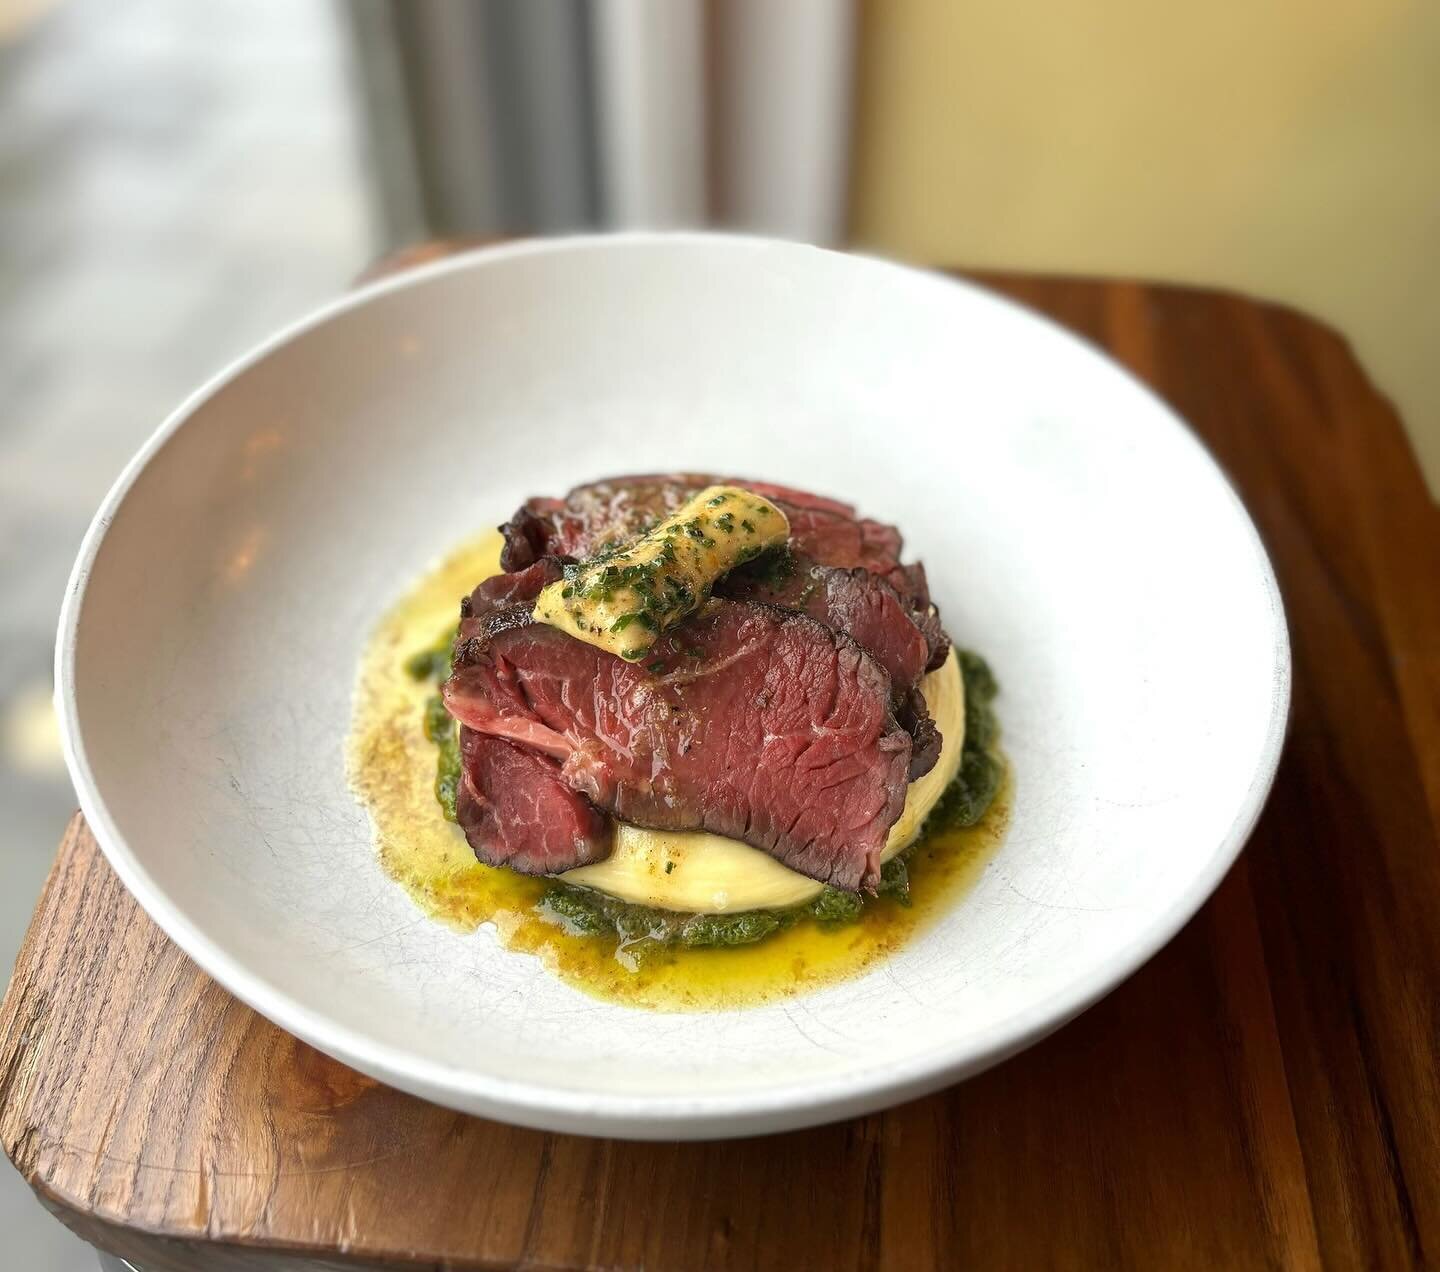 You&rsquo;ll want this in your mouth now&hellip; 
Beef tournedos with a marmite &amp; Guinness glaze 🤯
Caf&eacute; de Paris butter, salsa verde.

@lake_district_farmers 
@jamieduvalechef